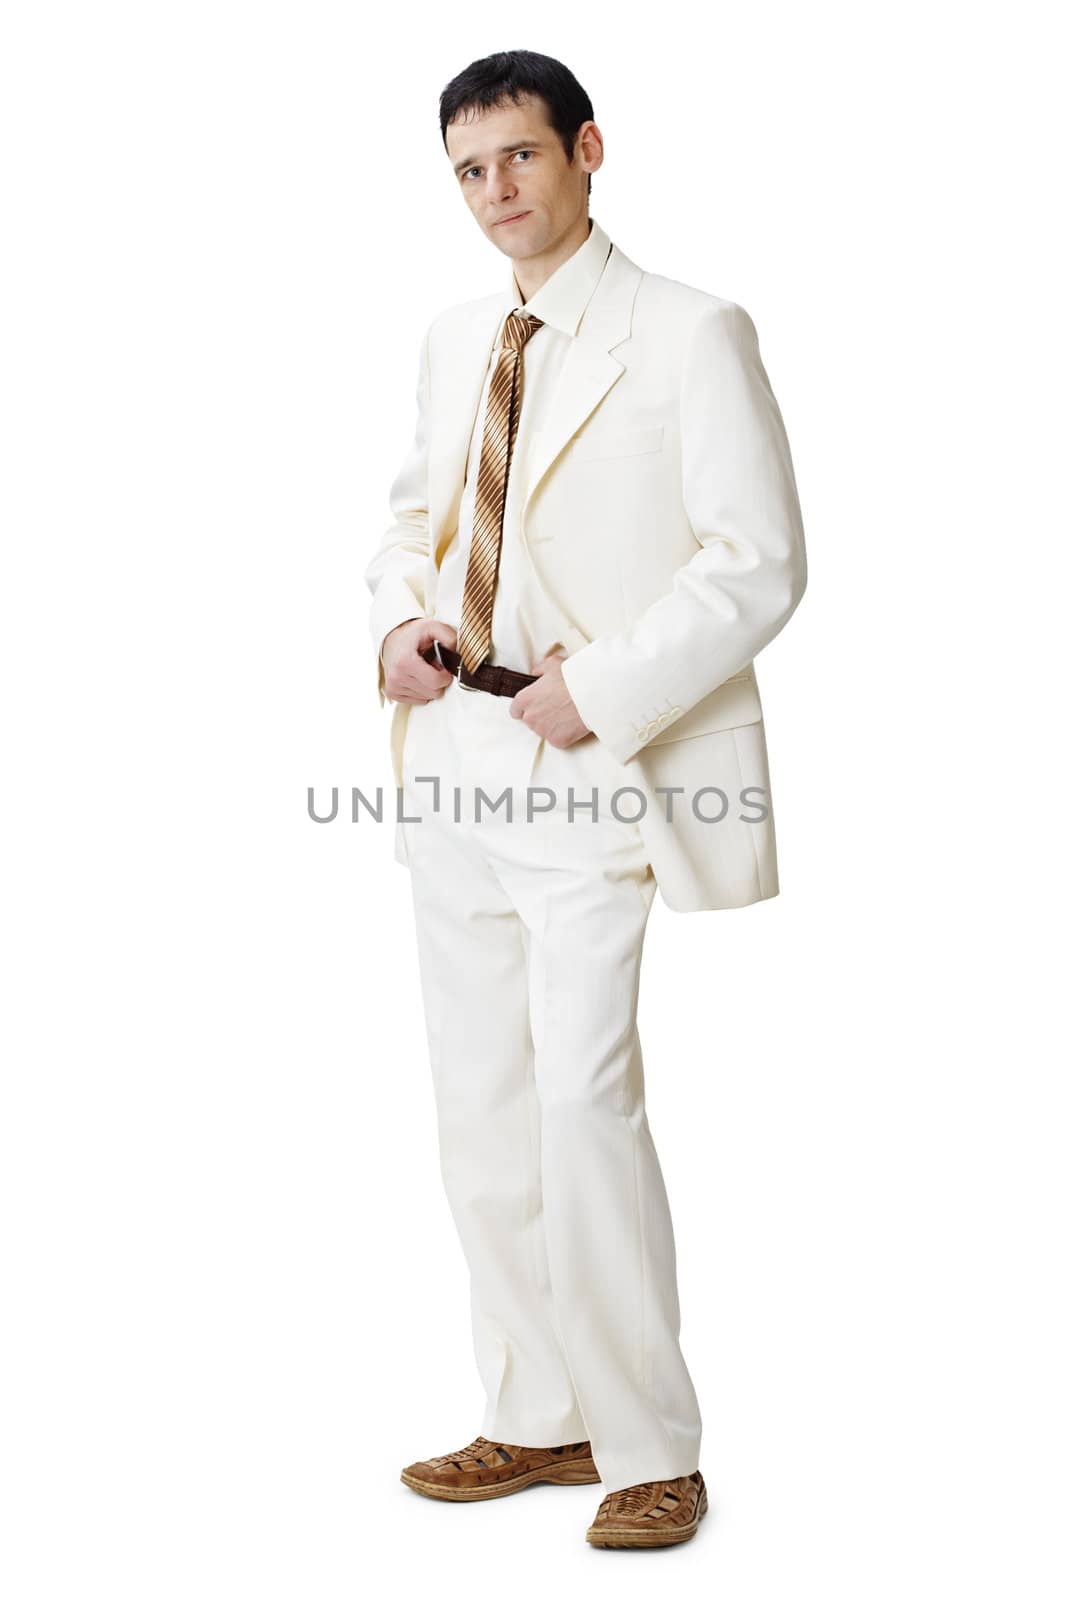 The young man in a light suit on a white background